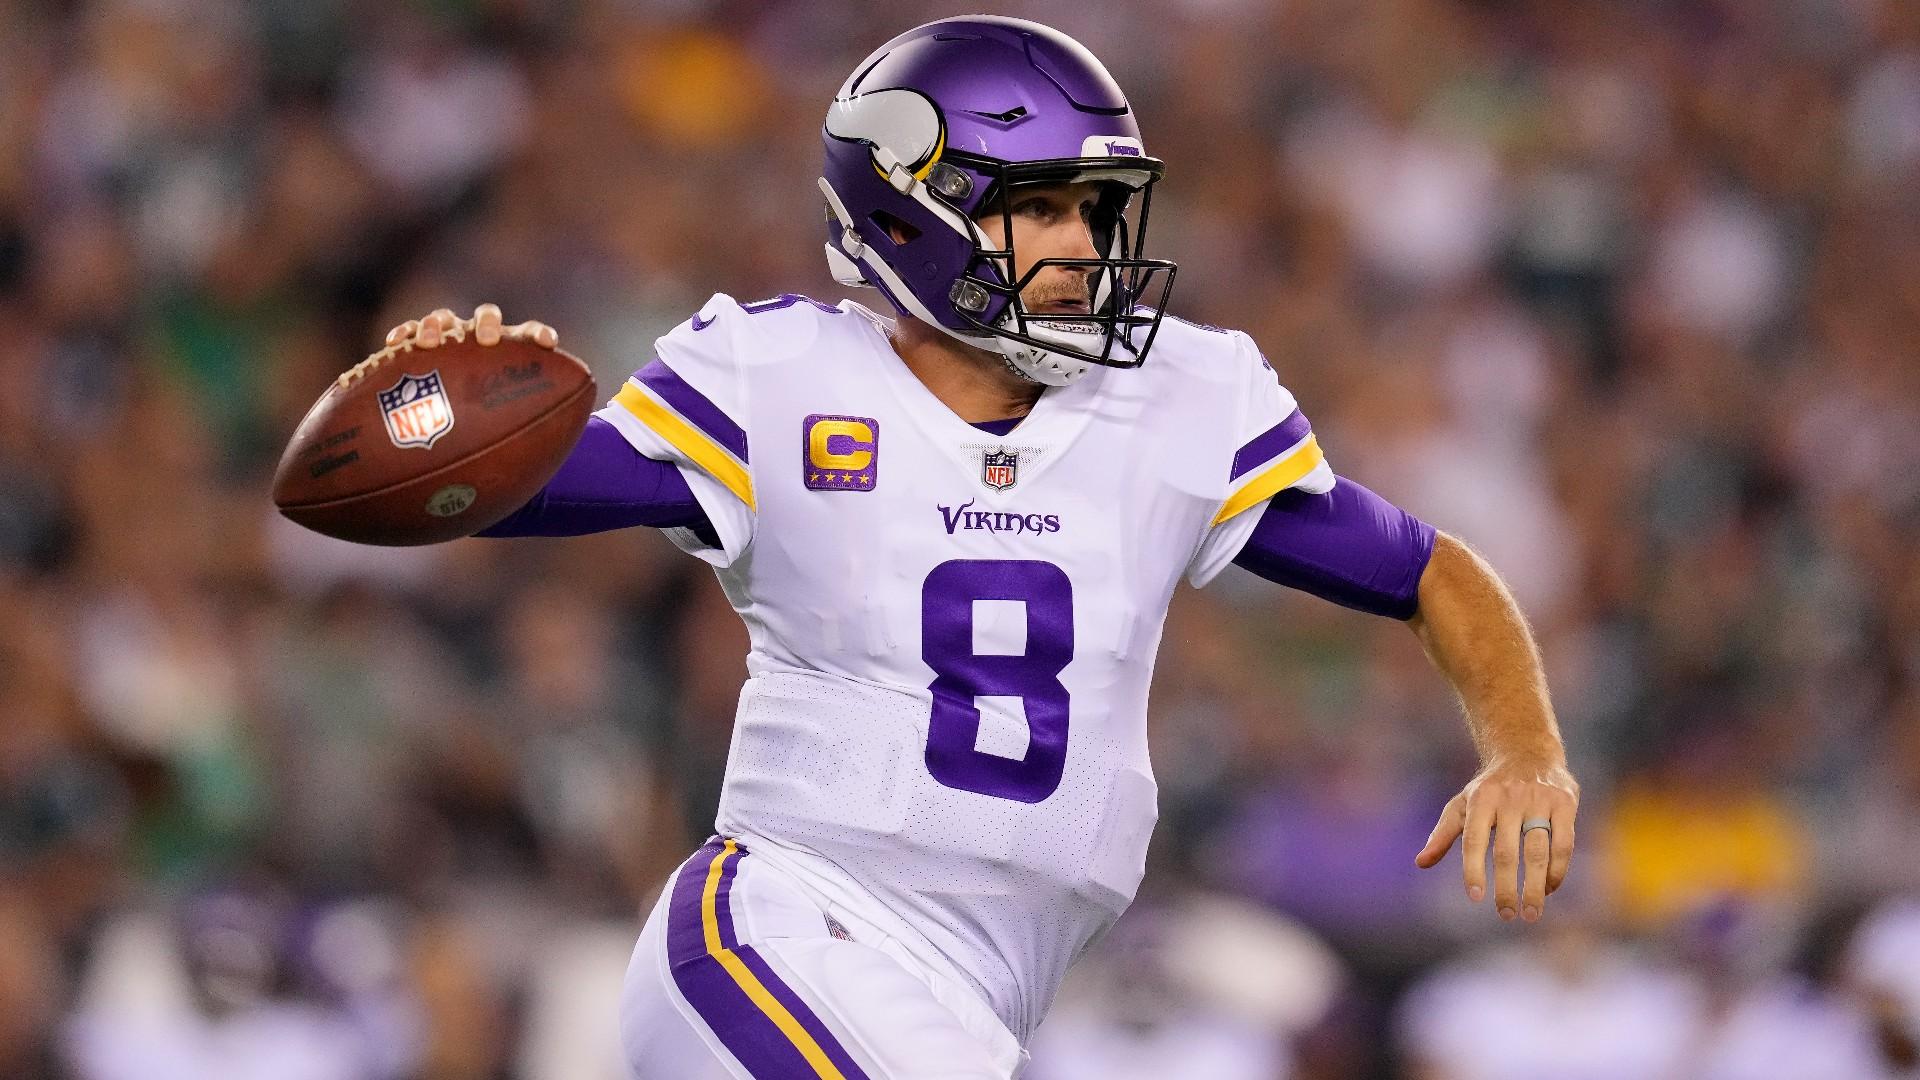 NFL Free Agency Buzz Kirk Cousins Eyes New Horizons with Falcons Talks and Vikings' Uncertain Future---